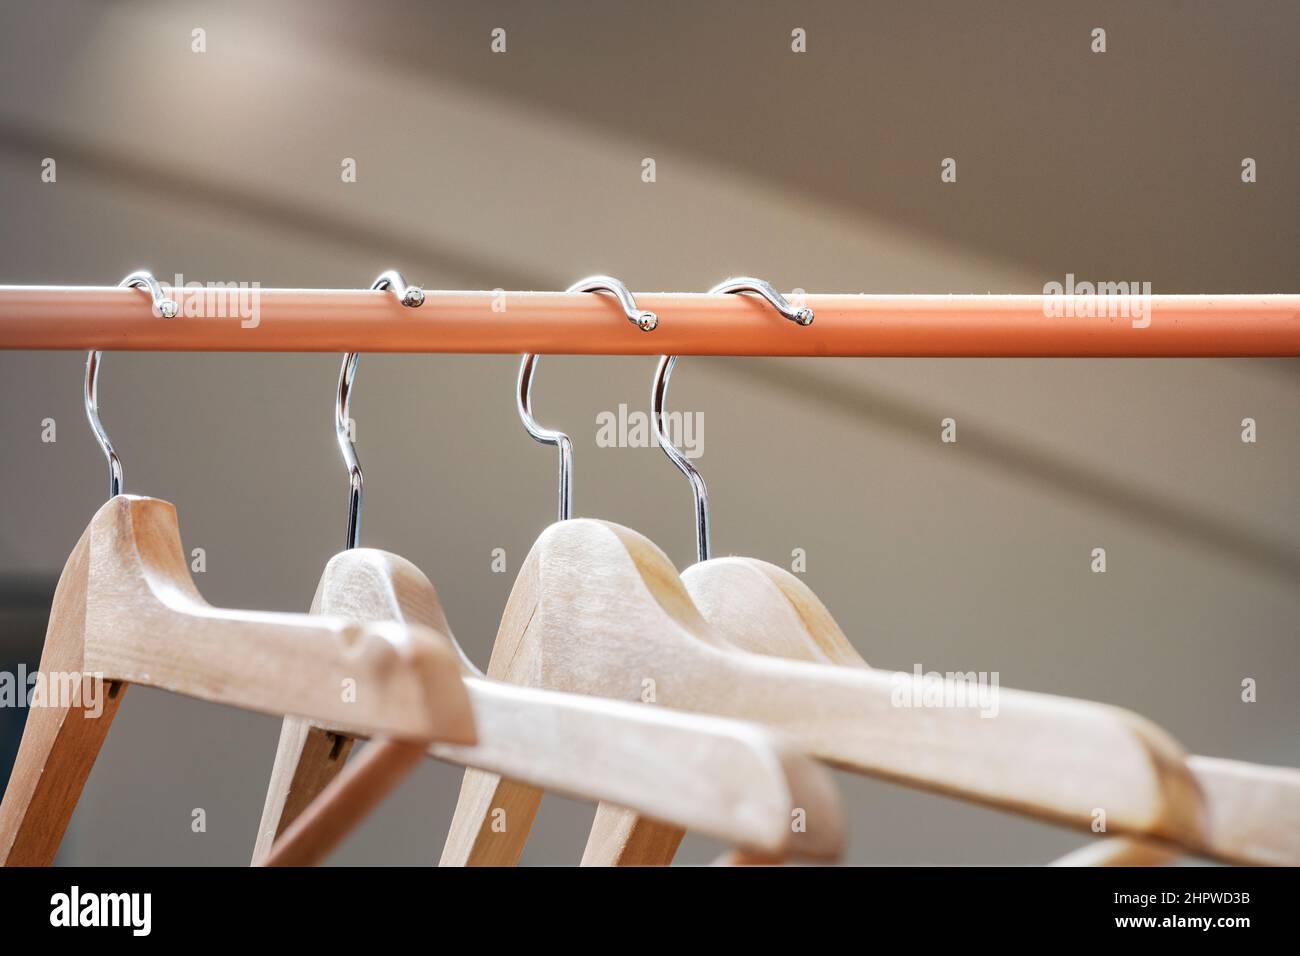 Wooden hangers hung on a light brown or tile bar Stock Photo